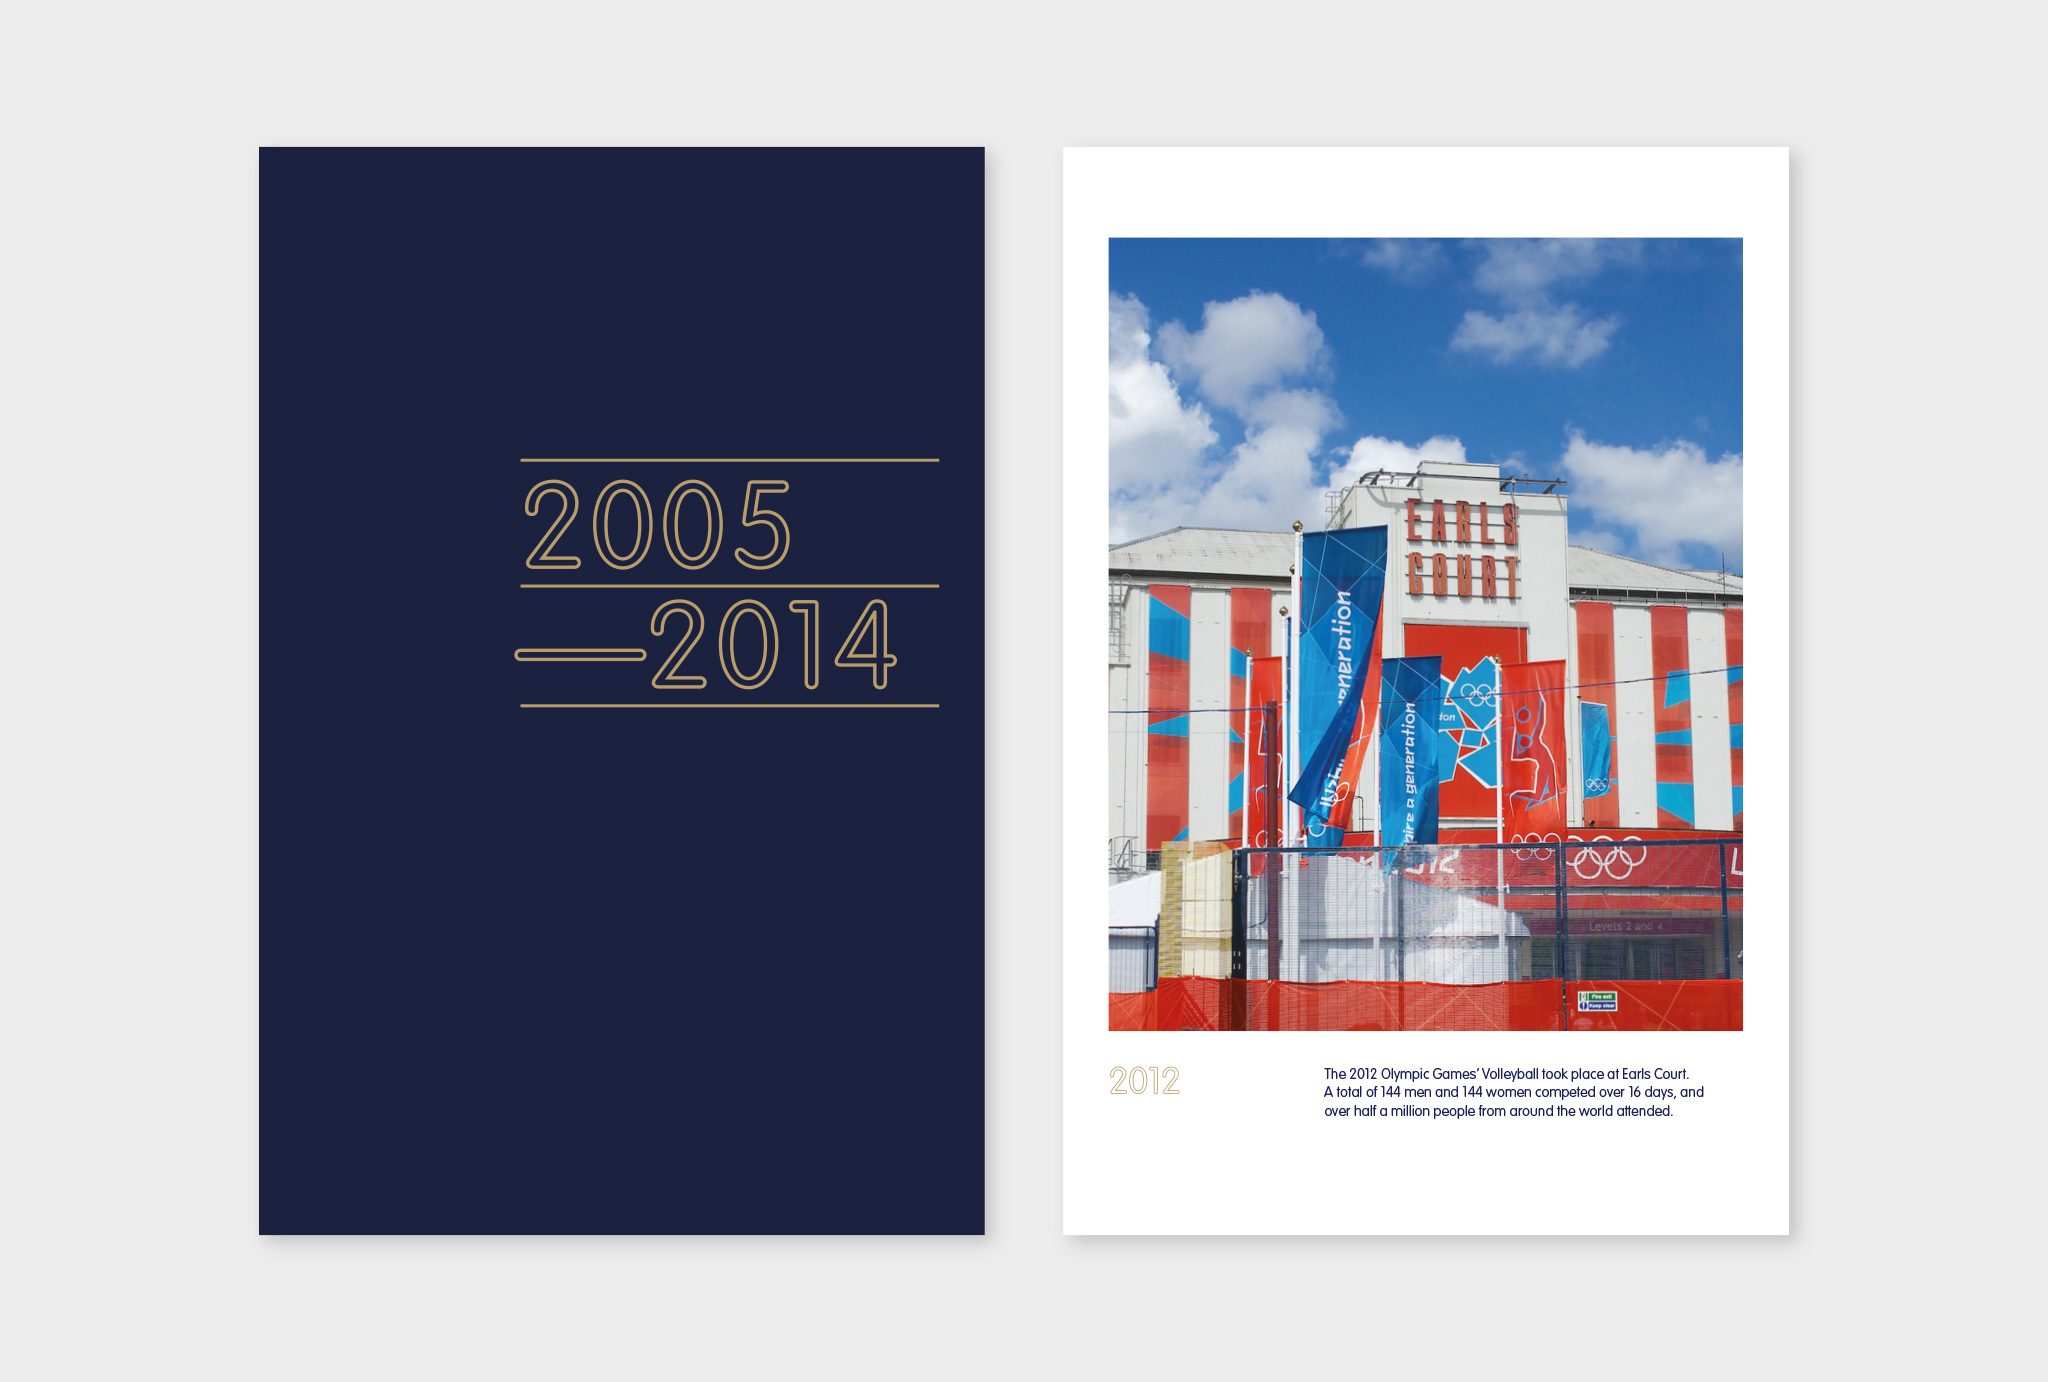 '2005-2014’ written in grey on a dark blue exhibition panels, next to colourful picture of the Earls Court in 2012